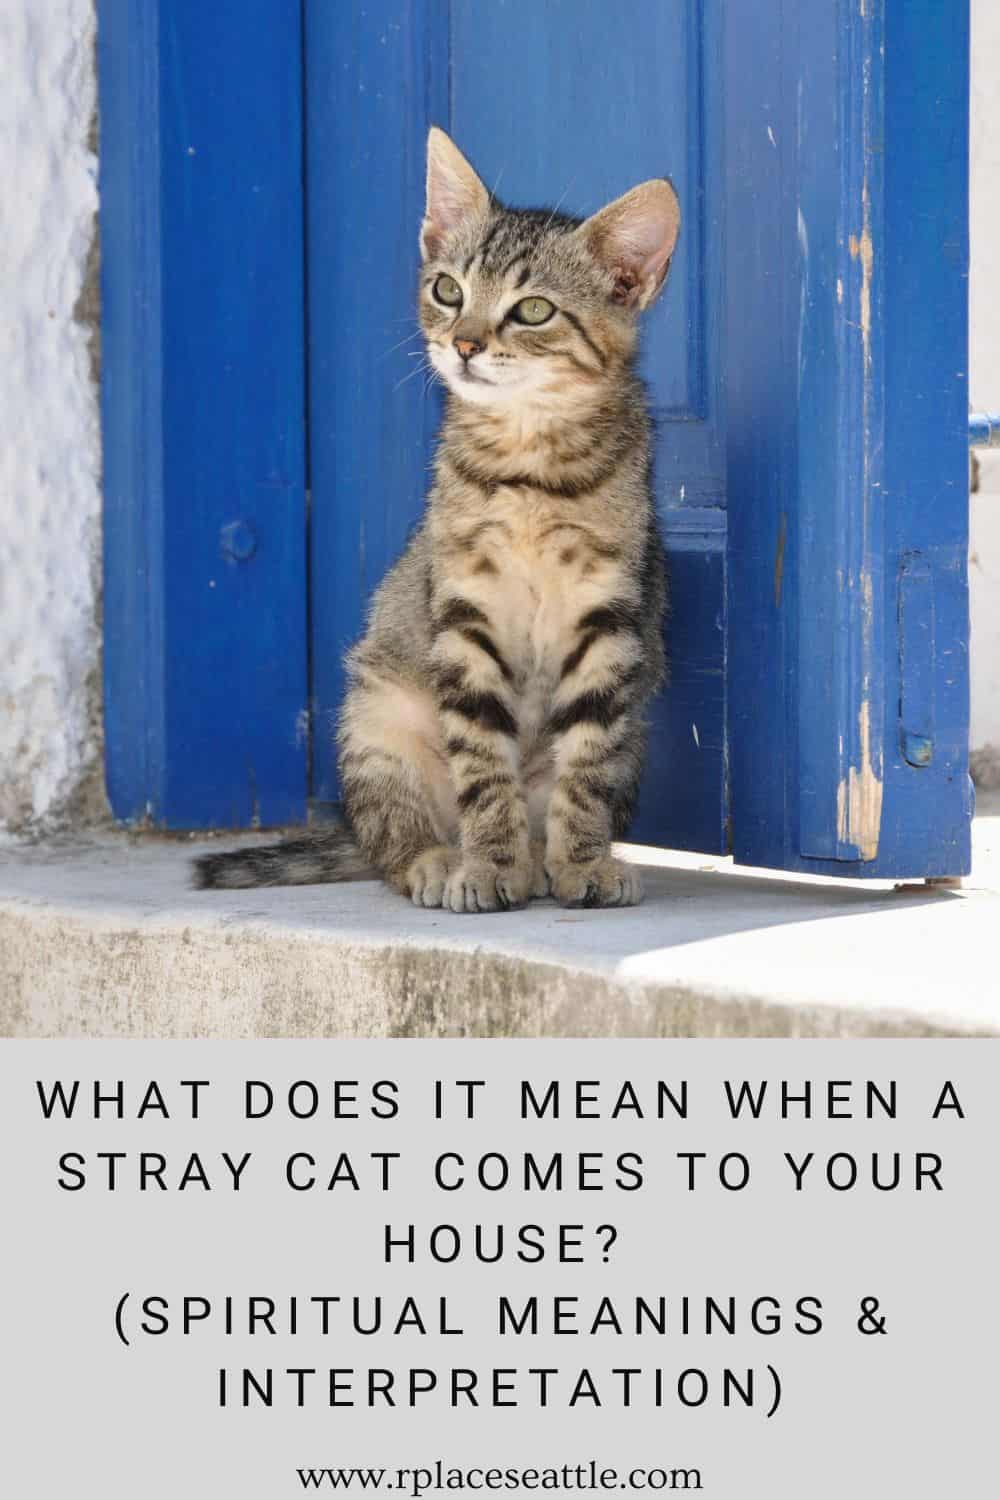 What Does It Mean When A Stray Cat Comes To Your House? (Spiritual Meanings & Interpretation)